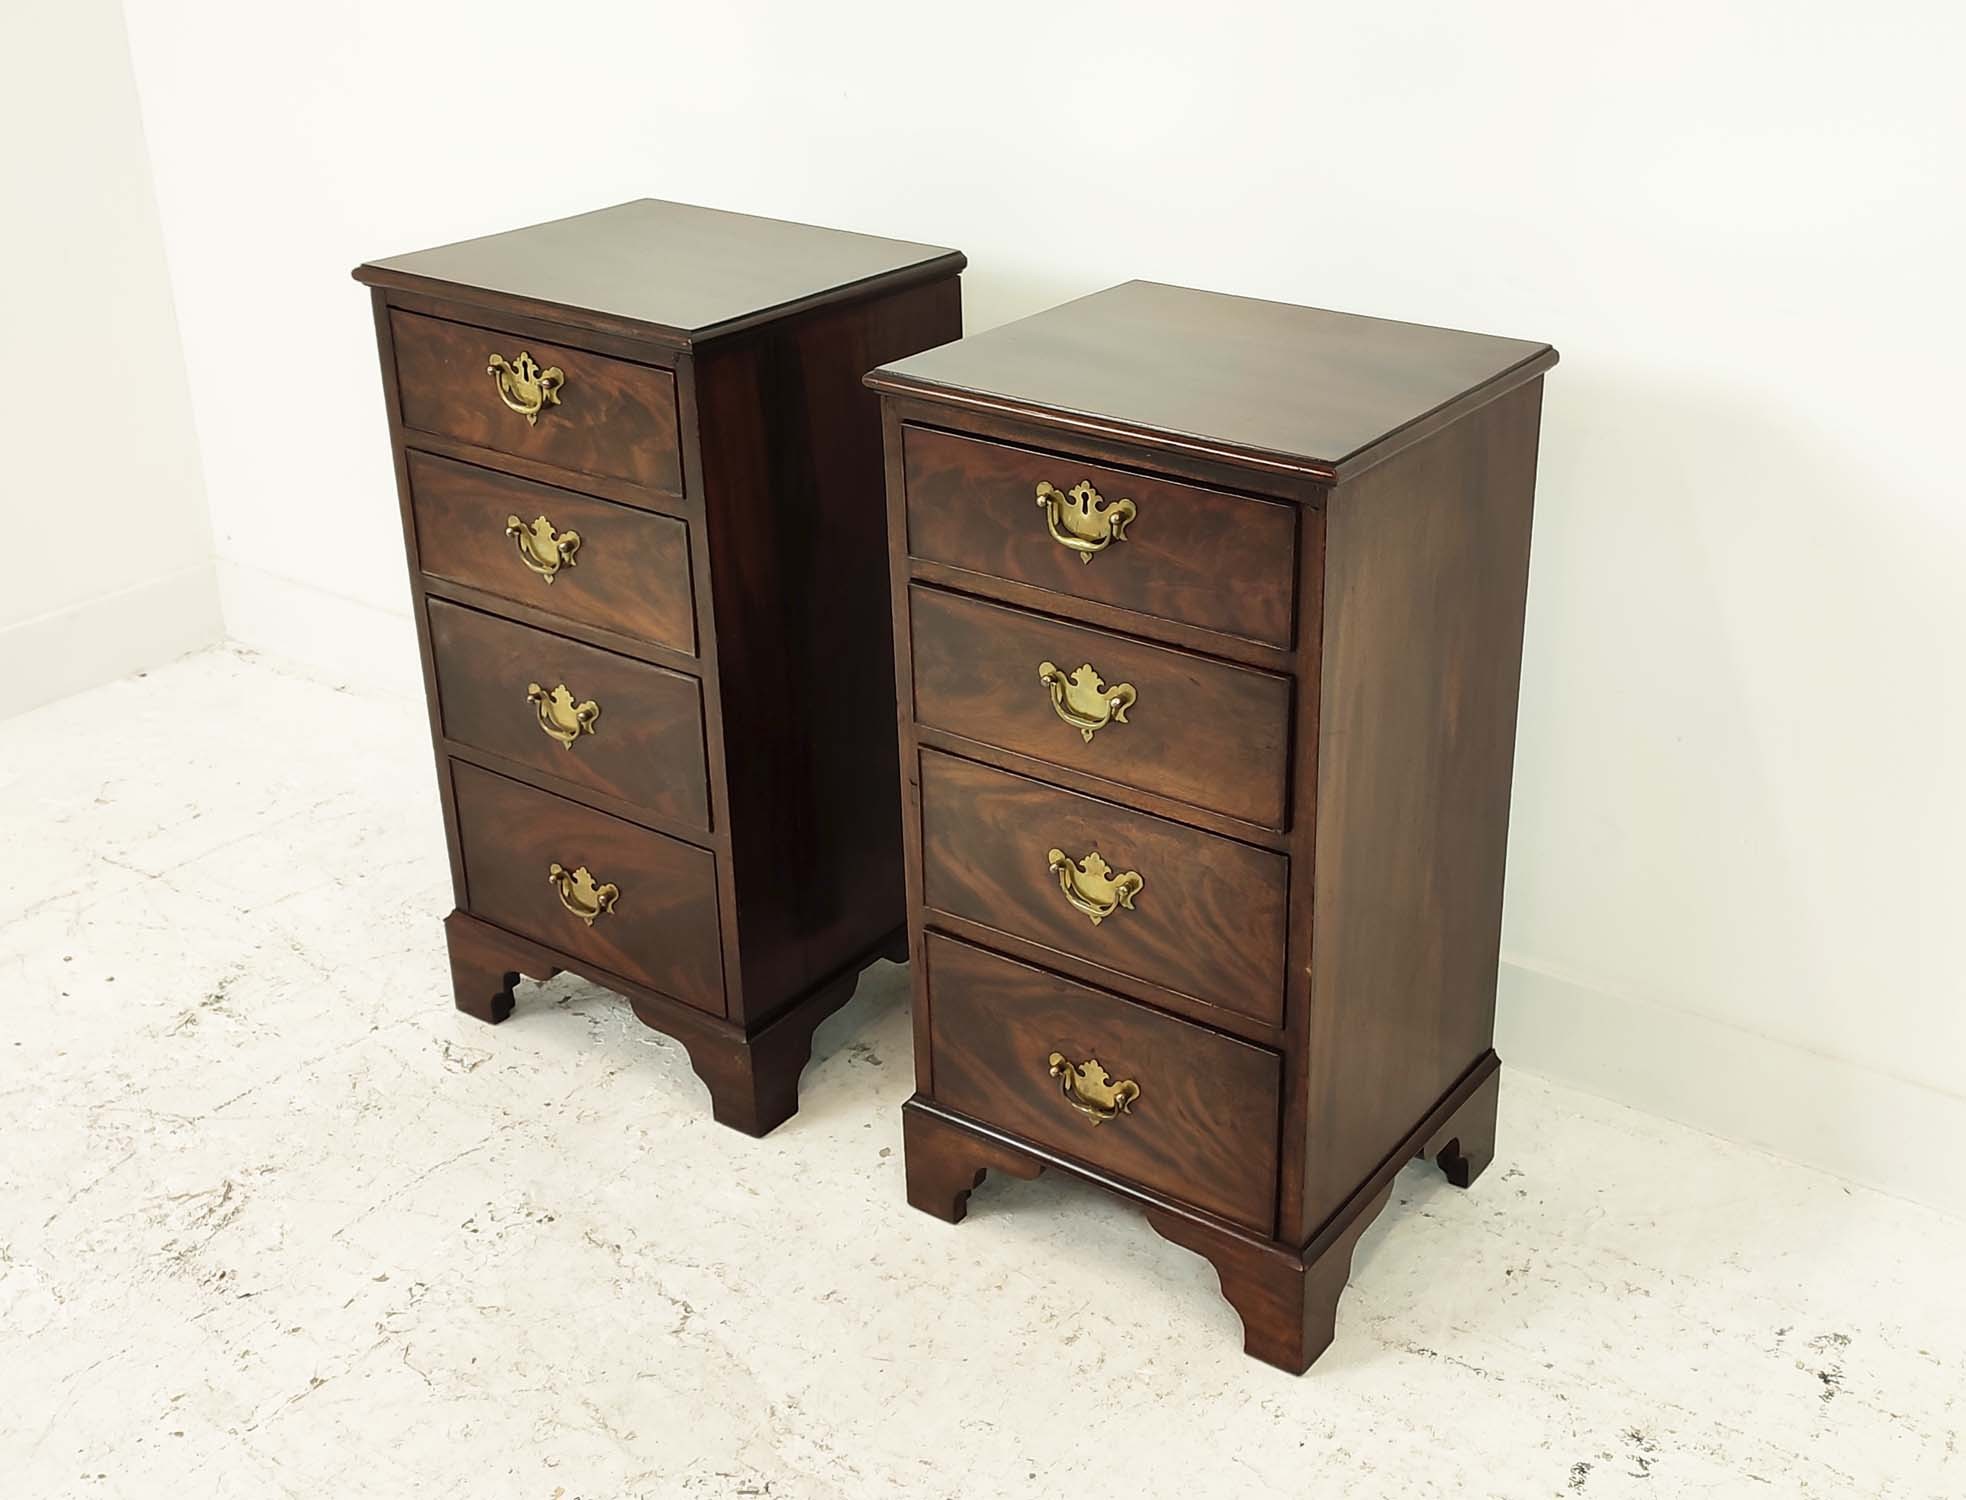 BEDSIDE CHESTS, a pair, late 19th/early 20th century mahogany, labelled S & H Jewel of four drawers, - Image 3 of 8